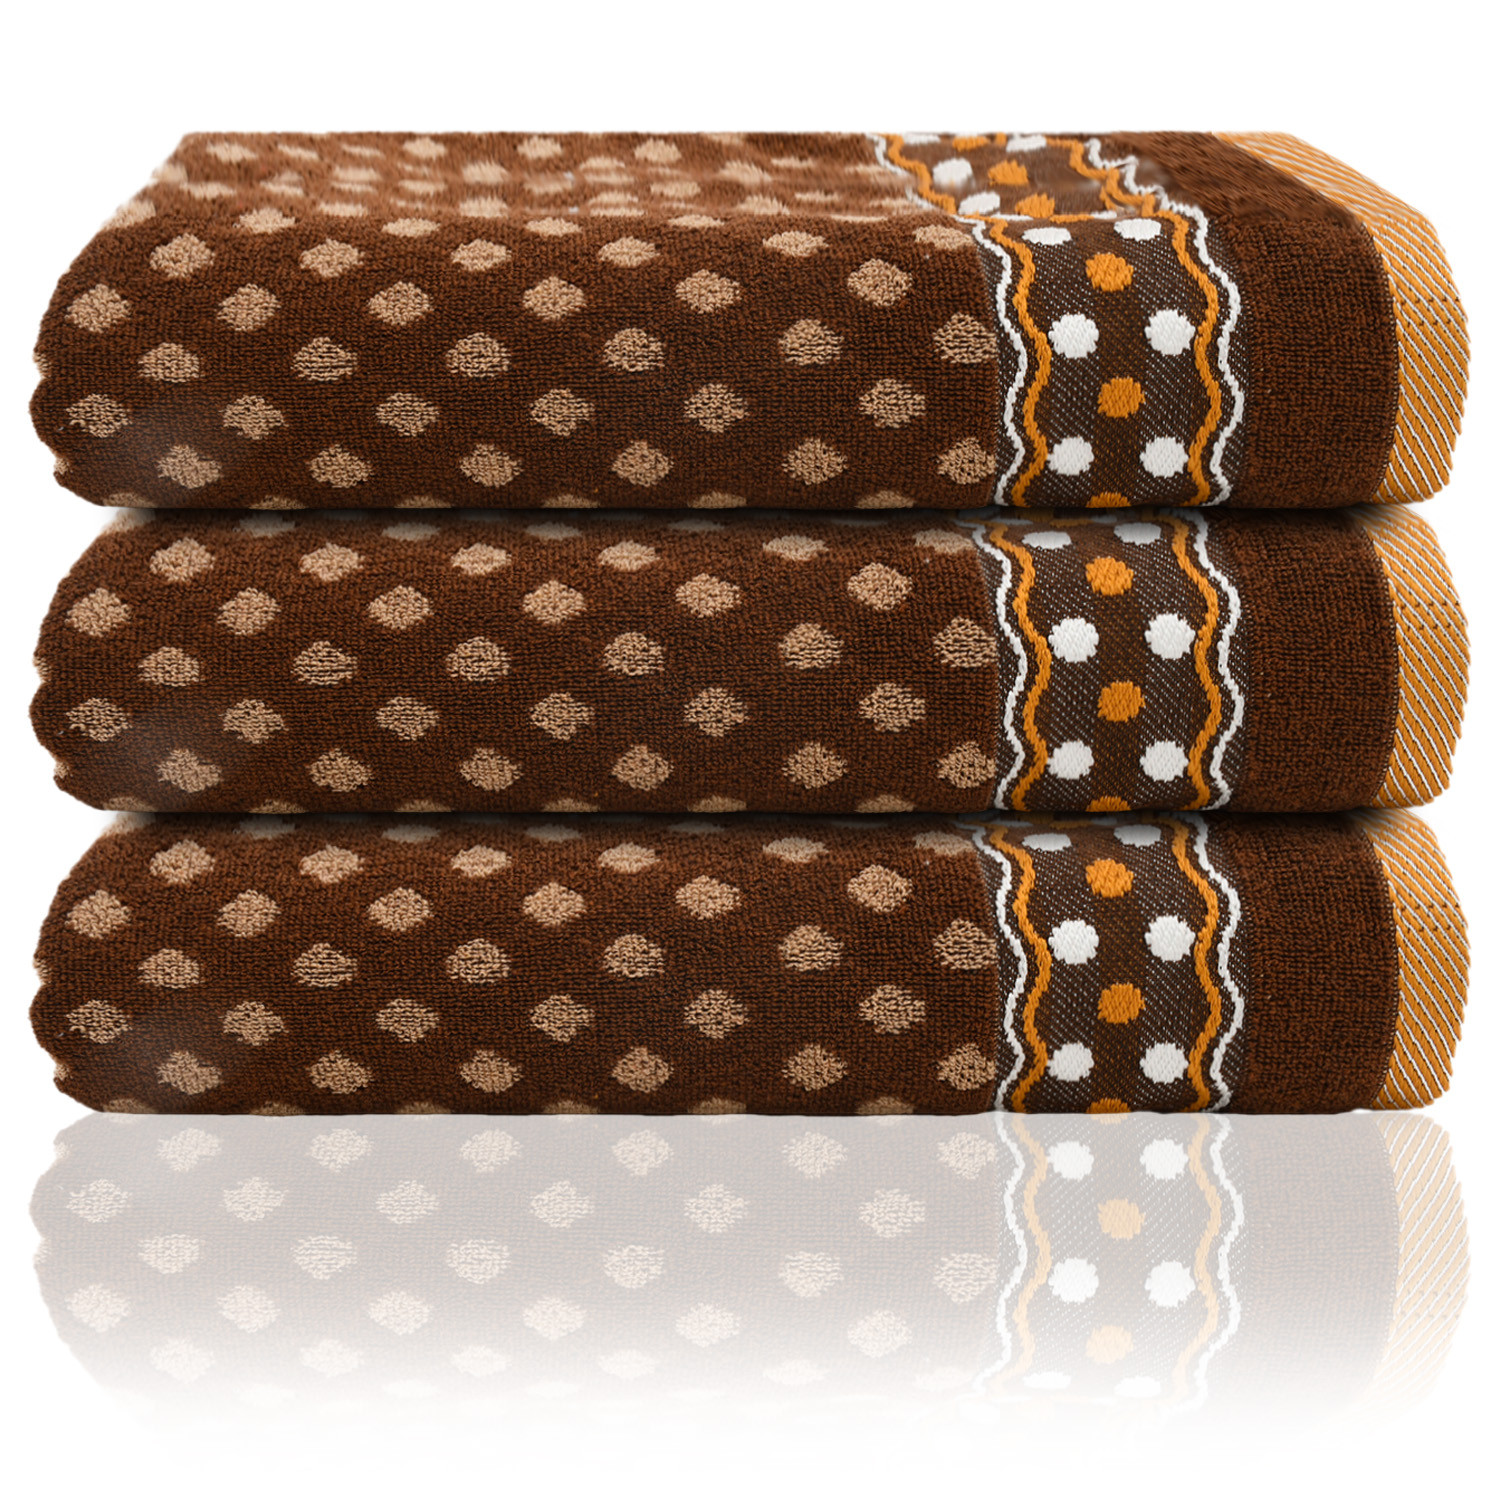 Kuber Industries Luxurious Dot Printed Soft Cotton Bath Towel Perfect for Daily Use, 30